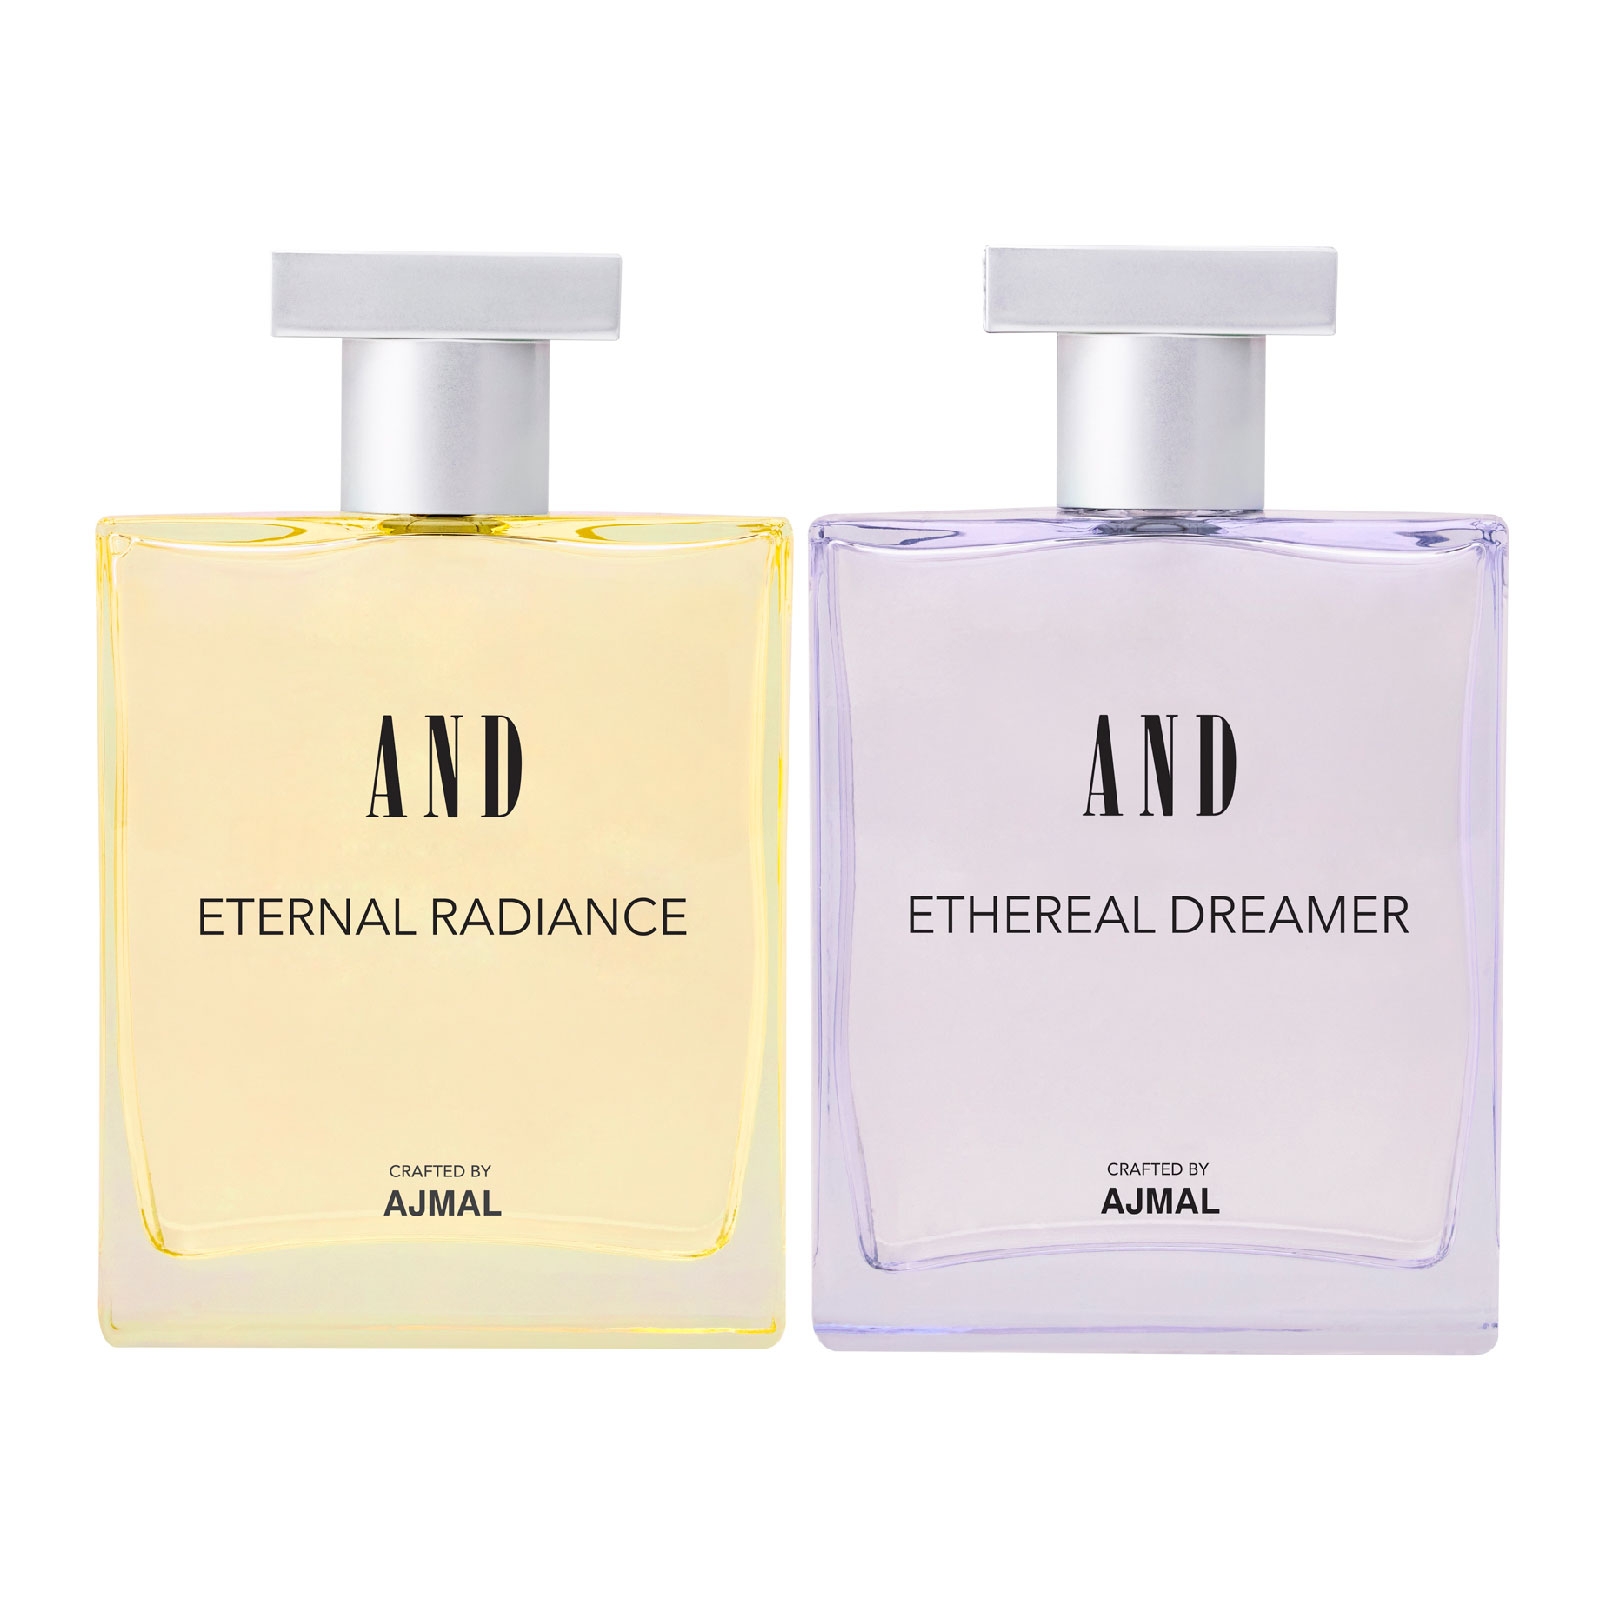 AND Eternal Radiance & Ethereal Dreamer Pack of 2 Eau De Perfume 50ML each  for Women Crafted by Ajmal